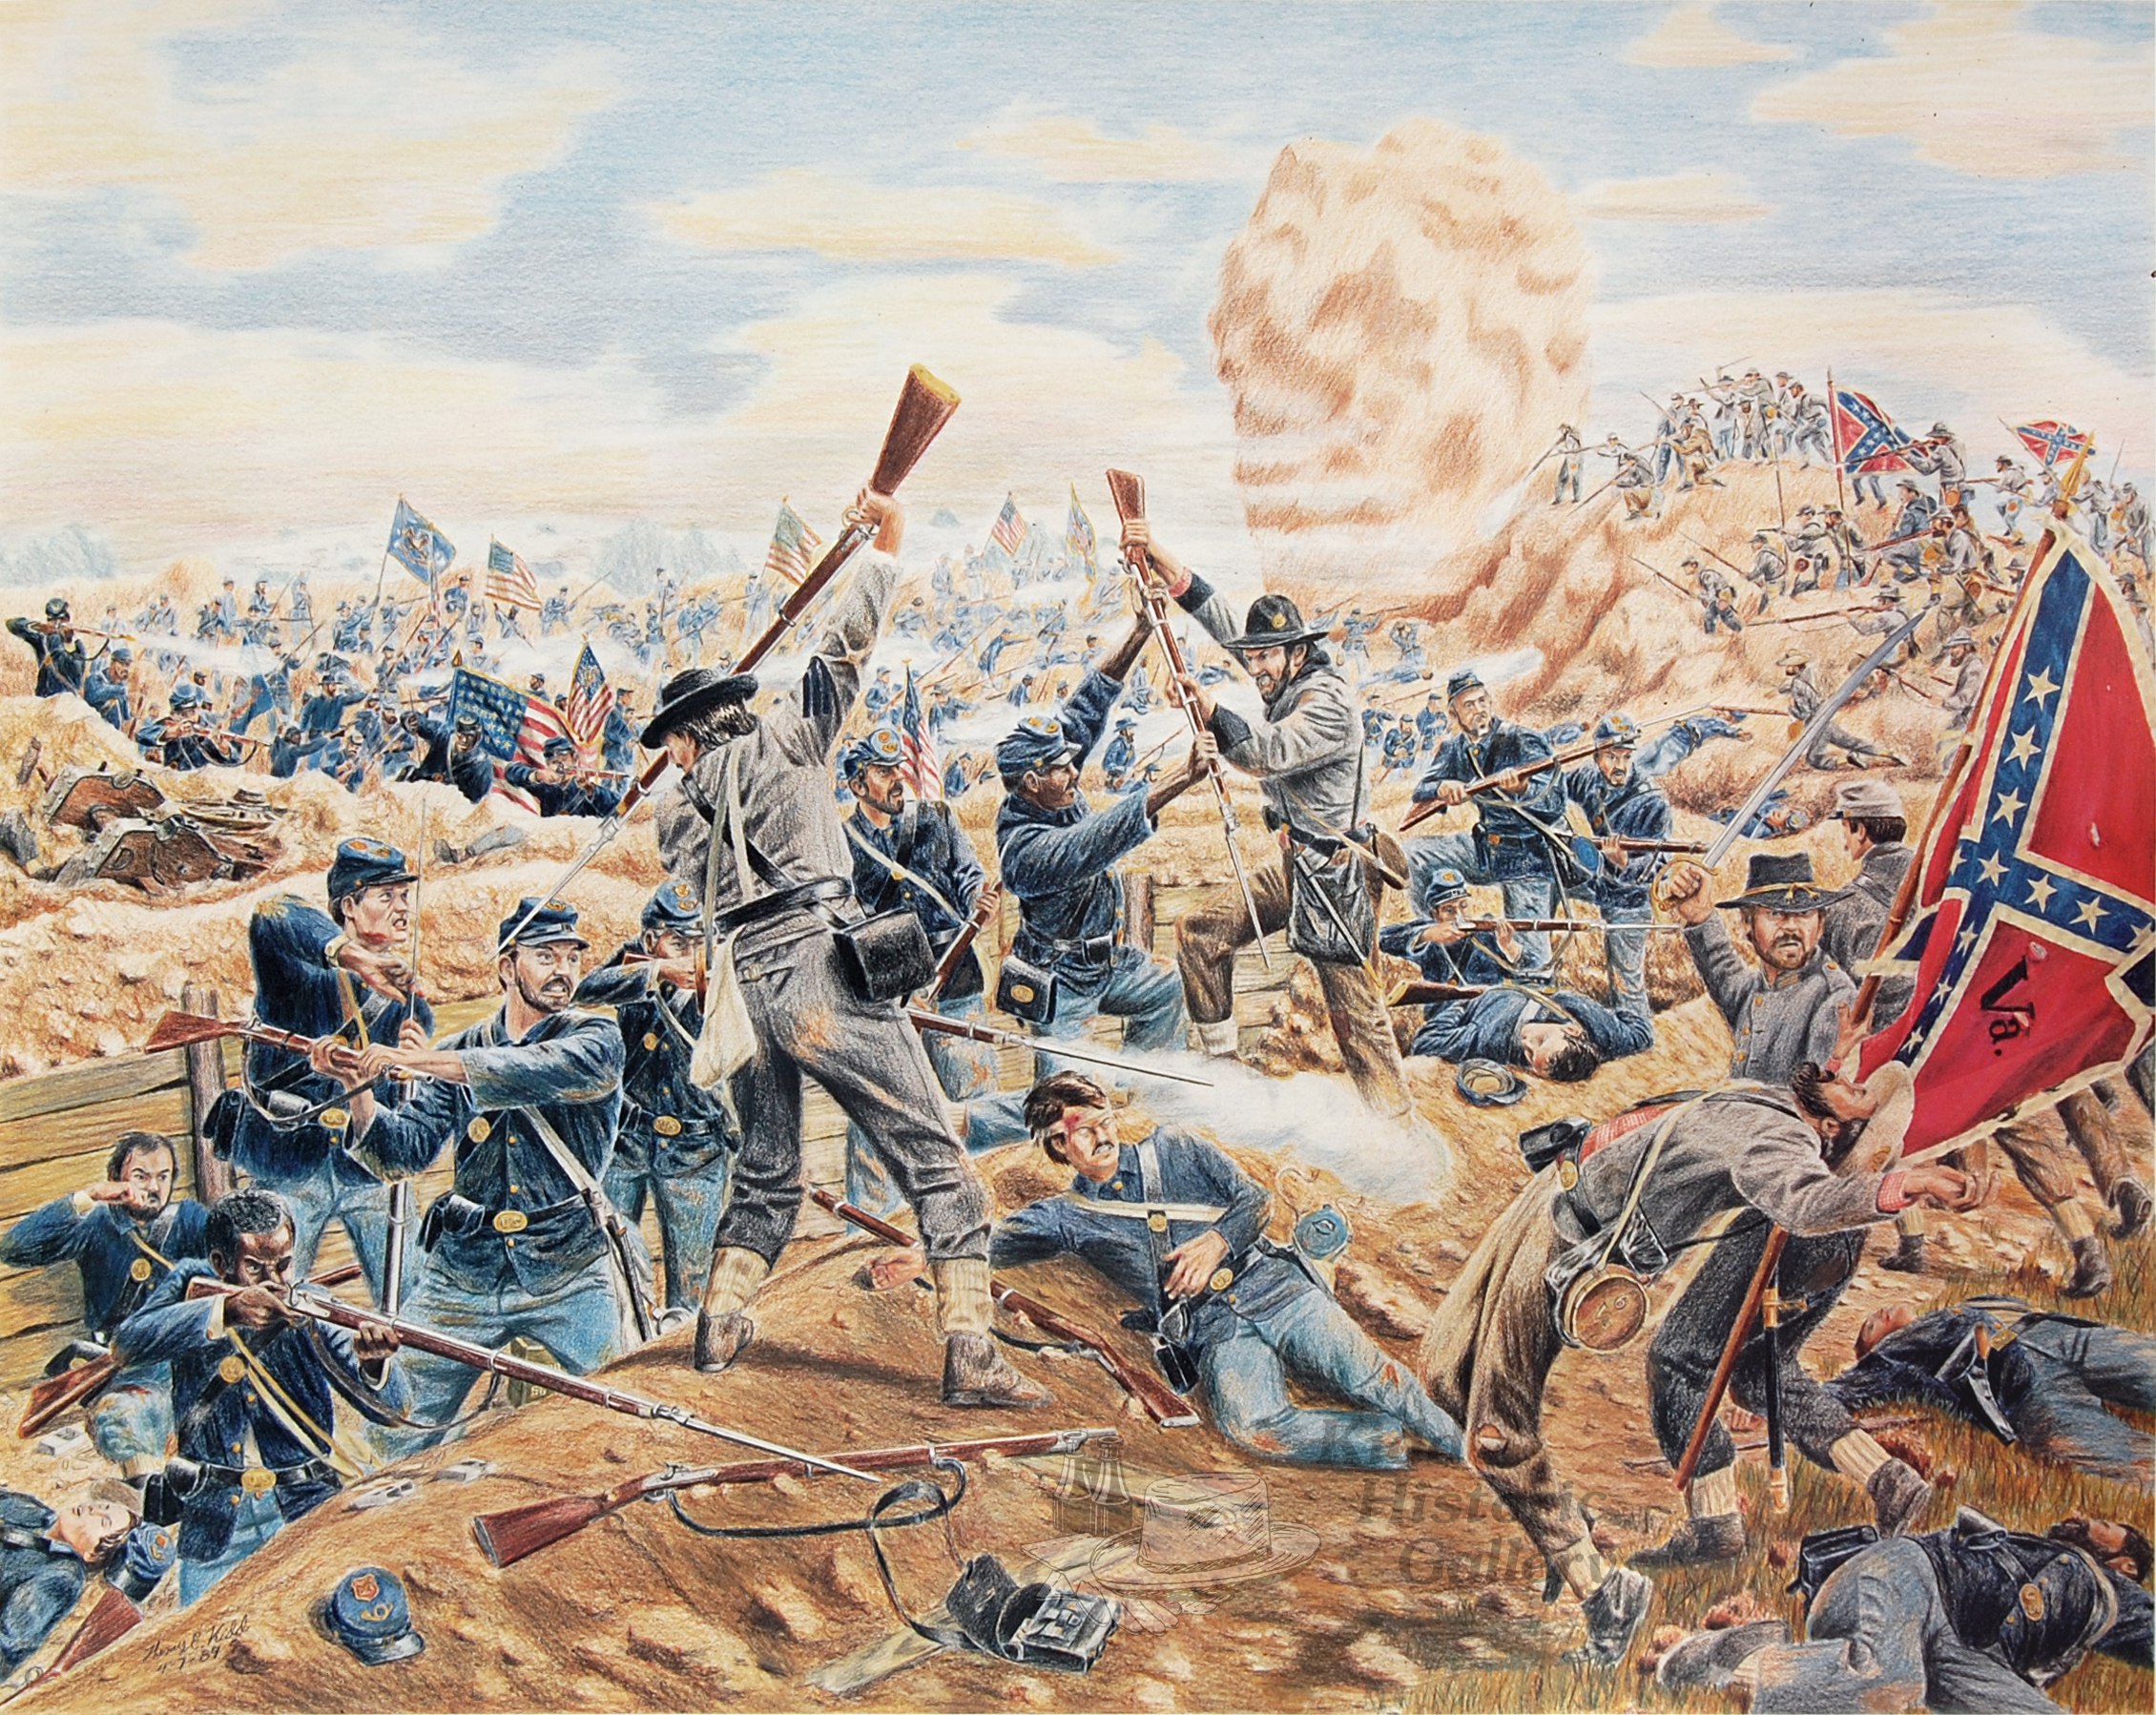 Today in military history: Pickett’s Charge in the Battle of Gettysburg